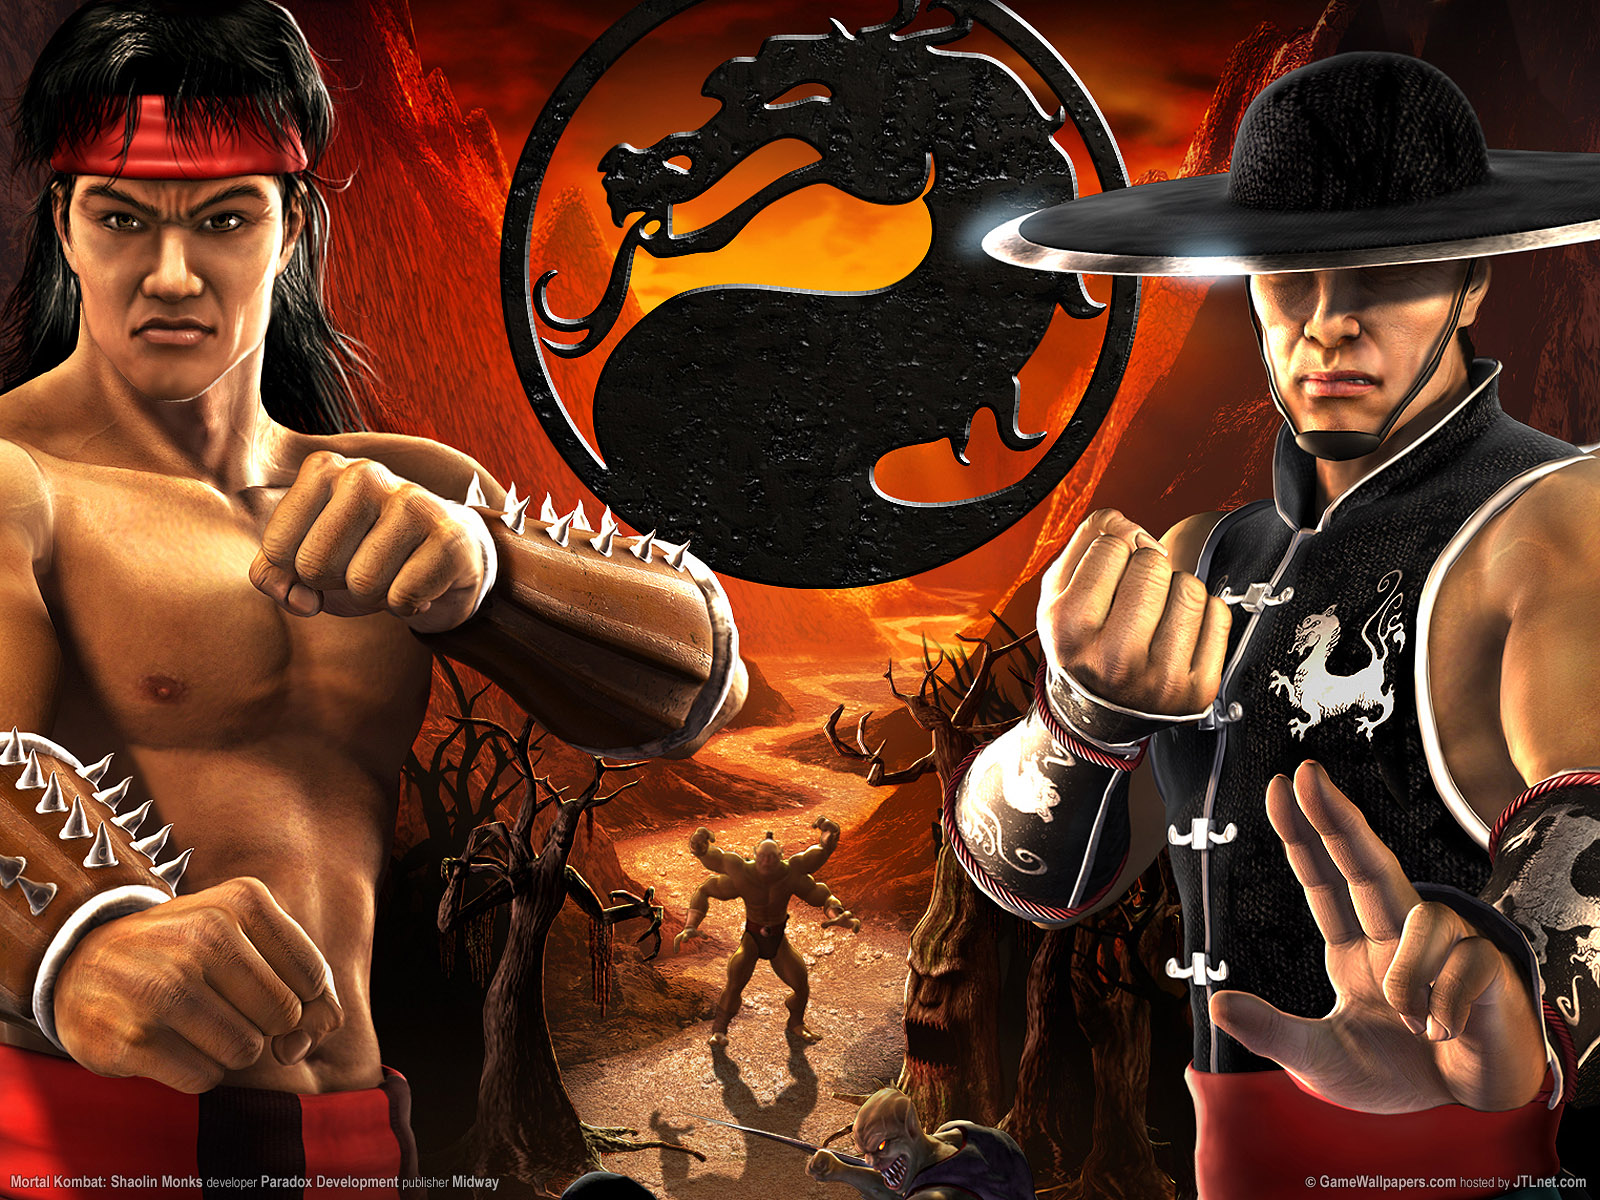 How To Download Mortal Kombat Shaolin Monks For Ppsspp